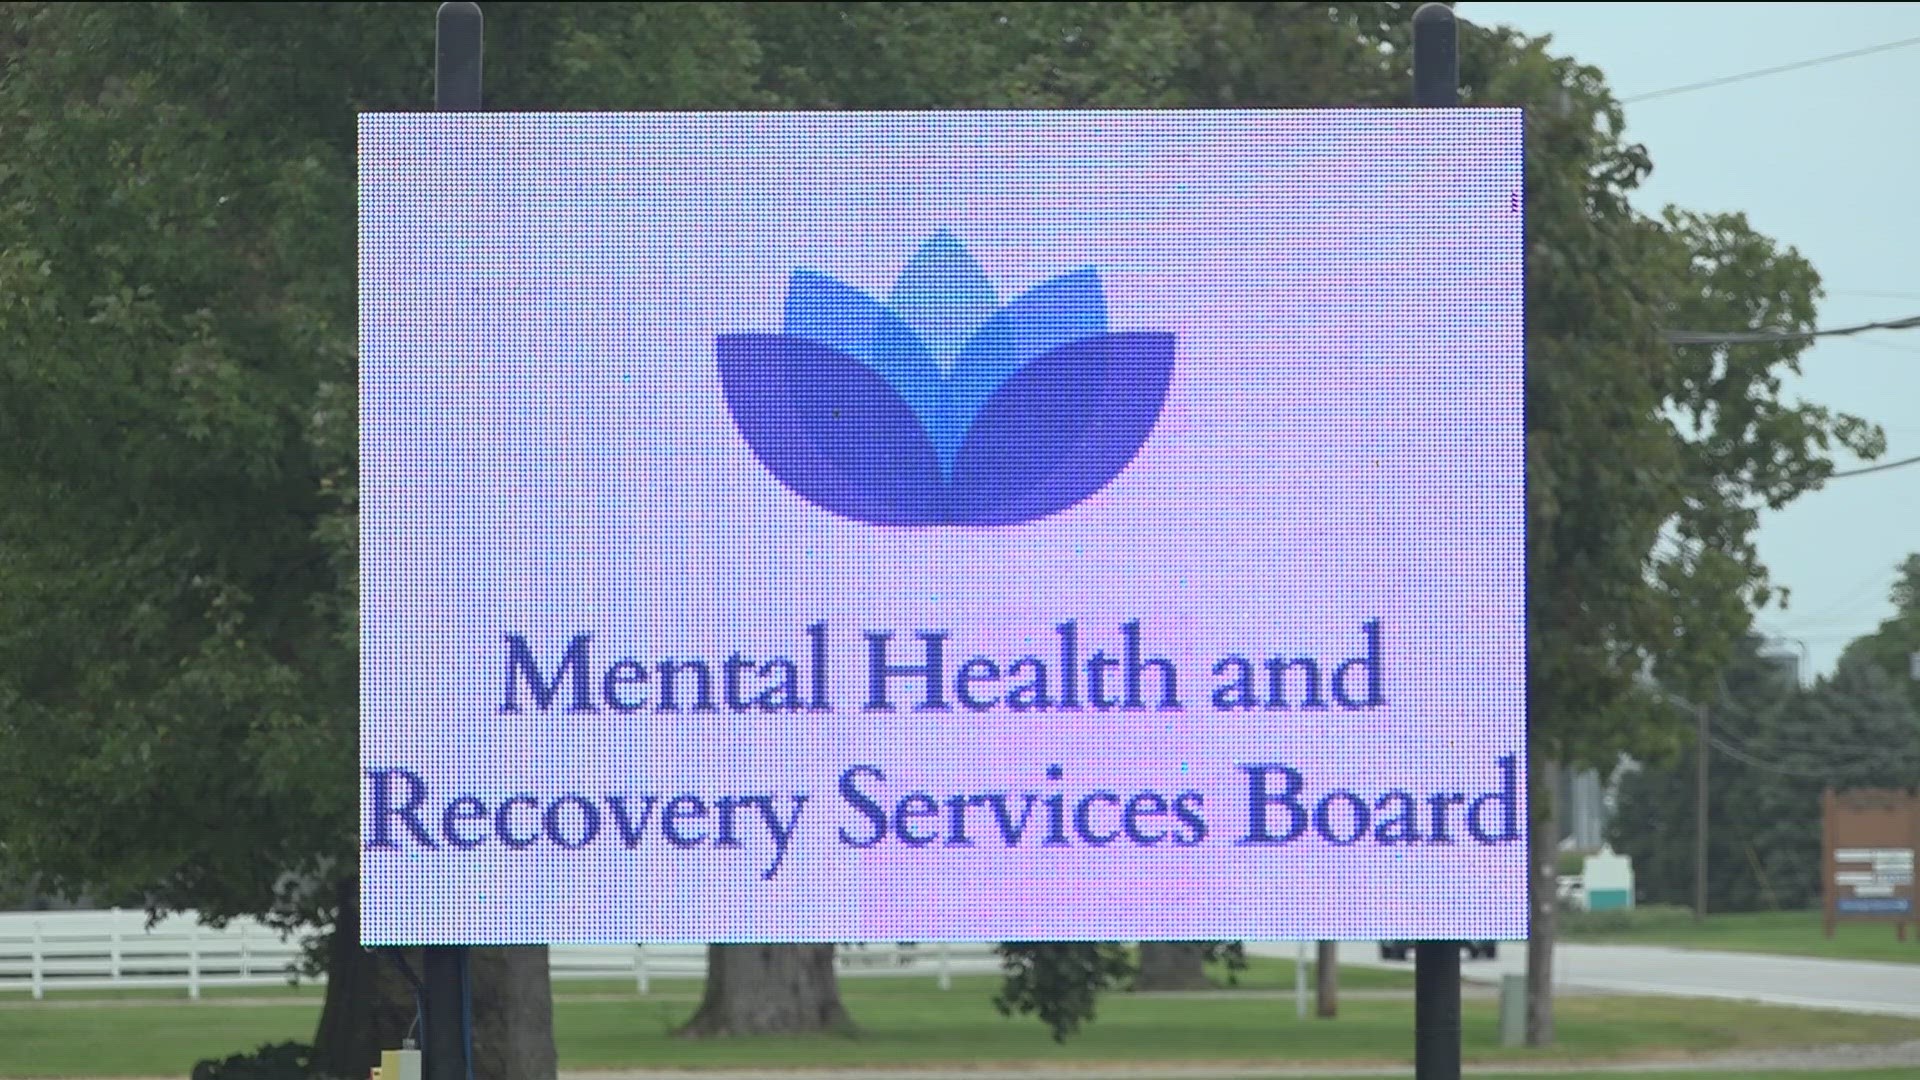 The Mental Health and Recovery Services Board of Seneca, Ottawa, Sandusky and Wyandot counties was recently awarded a $1.2 million ARPA 2 grant.